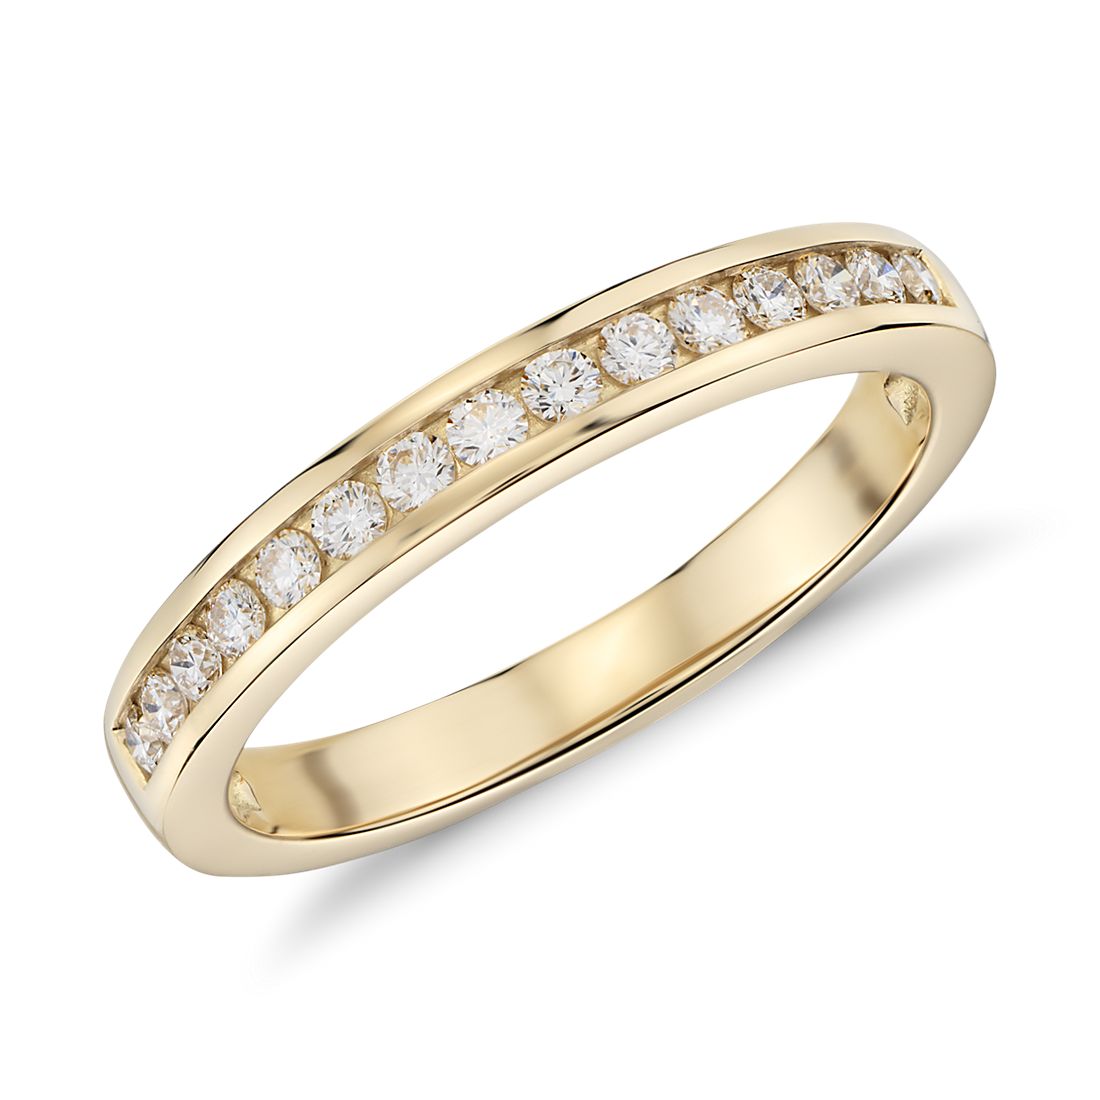 Channel Set Diamond Ring in 18k Yellow Gold (0.24 ct. tw.)